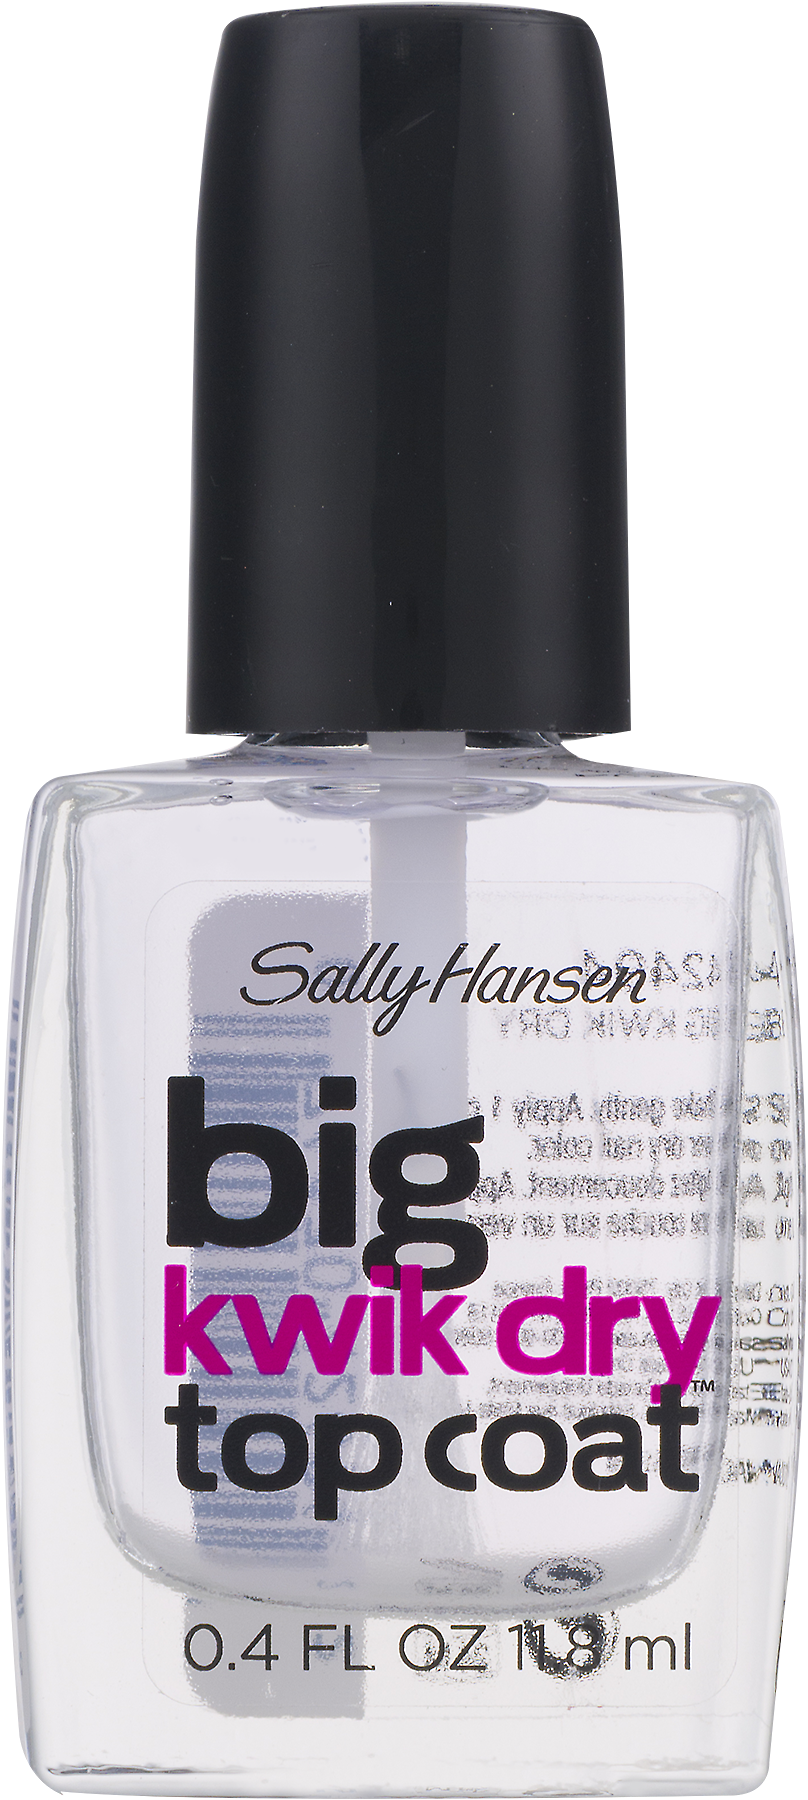 Sally Hansen Big Kwik Dry Top Nail Coat Treatment, High Gloss Finish, 0.4 fl oz , Quick Dry Nail Polish, Protects Nails from Cracking, Chipping, and Splitting, Only One Coat Needed - image 2 of 2